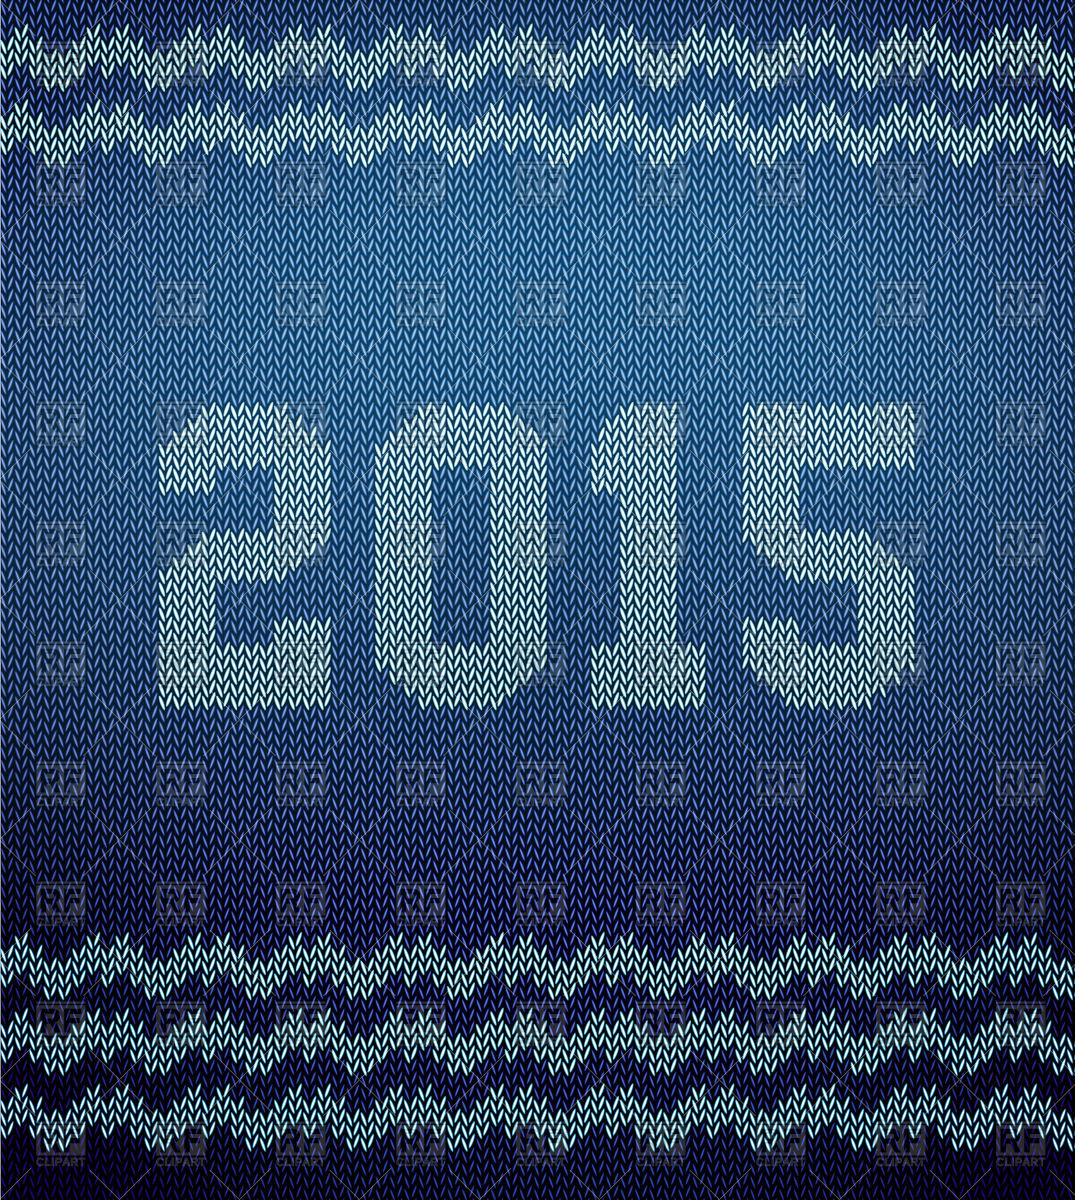 New 2015 Year Background With Blue Knitted Texture 47390 Download    